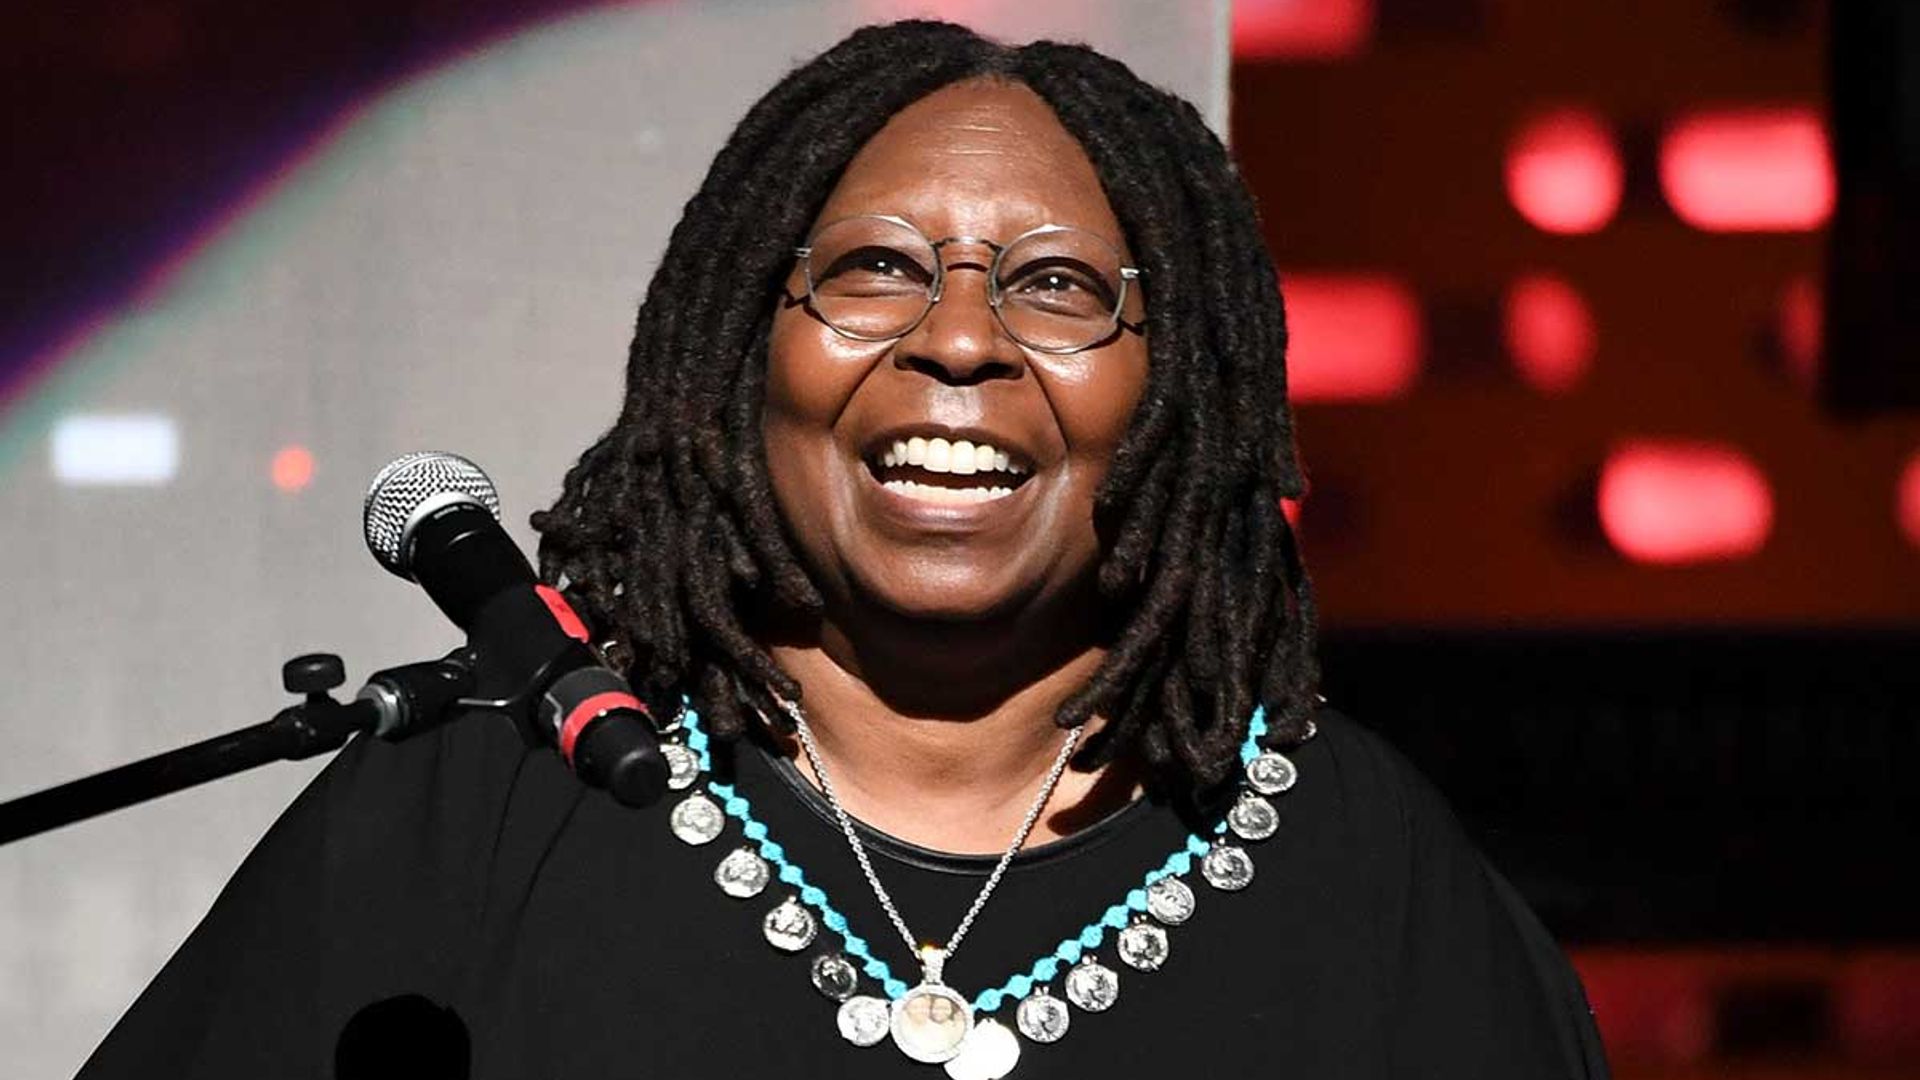 whoopi goldberg life changing surgery changed her appearance